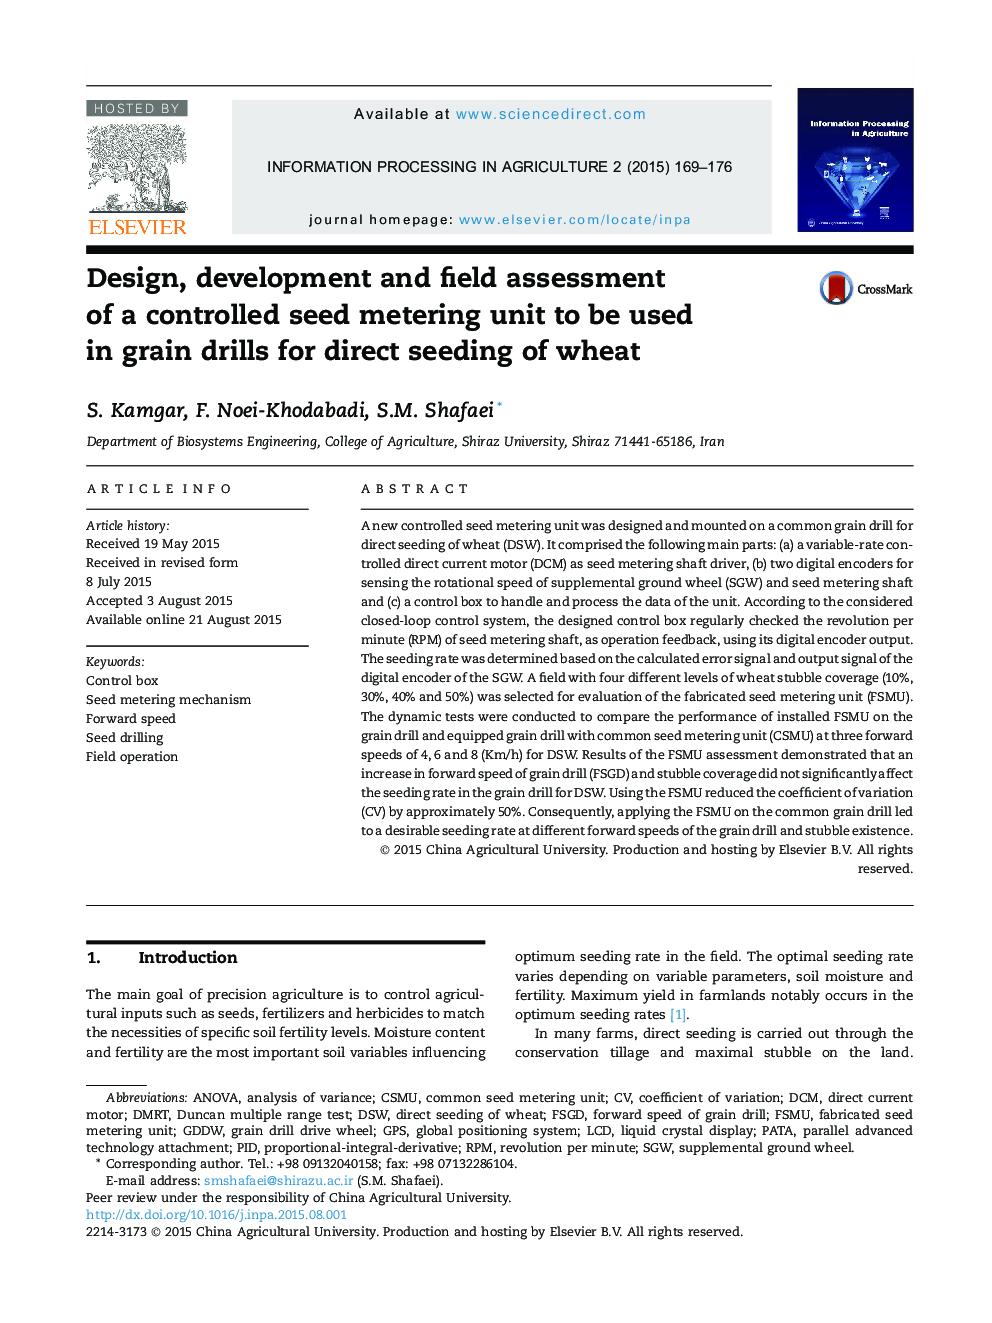 Design, development and field assessment of a controlled seed metering unit to be used in grain drills for direct seeding of wheat 